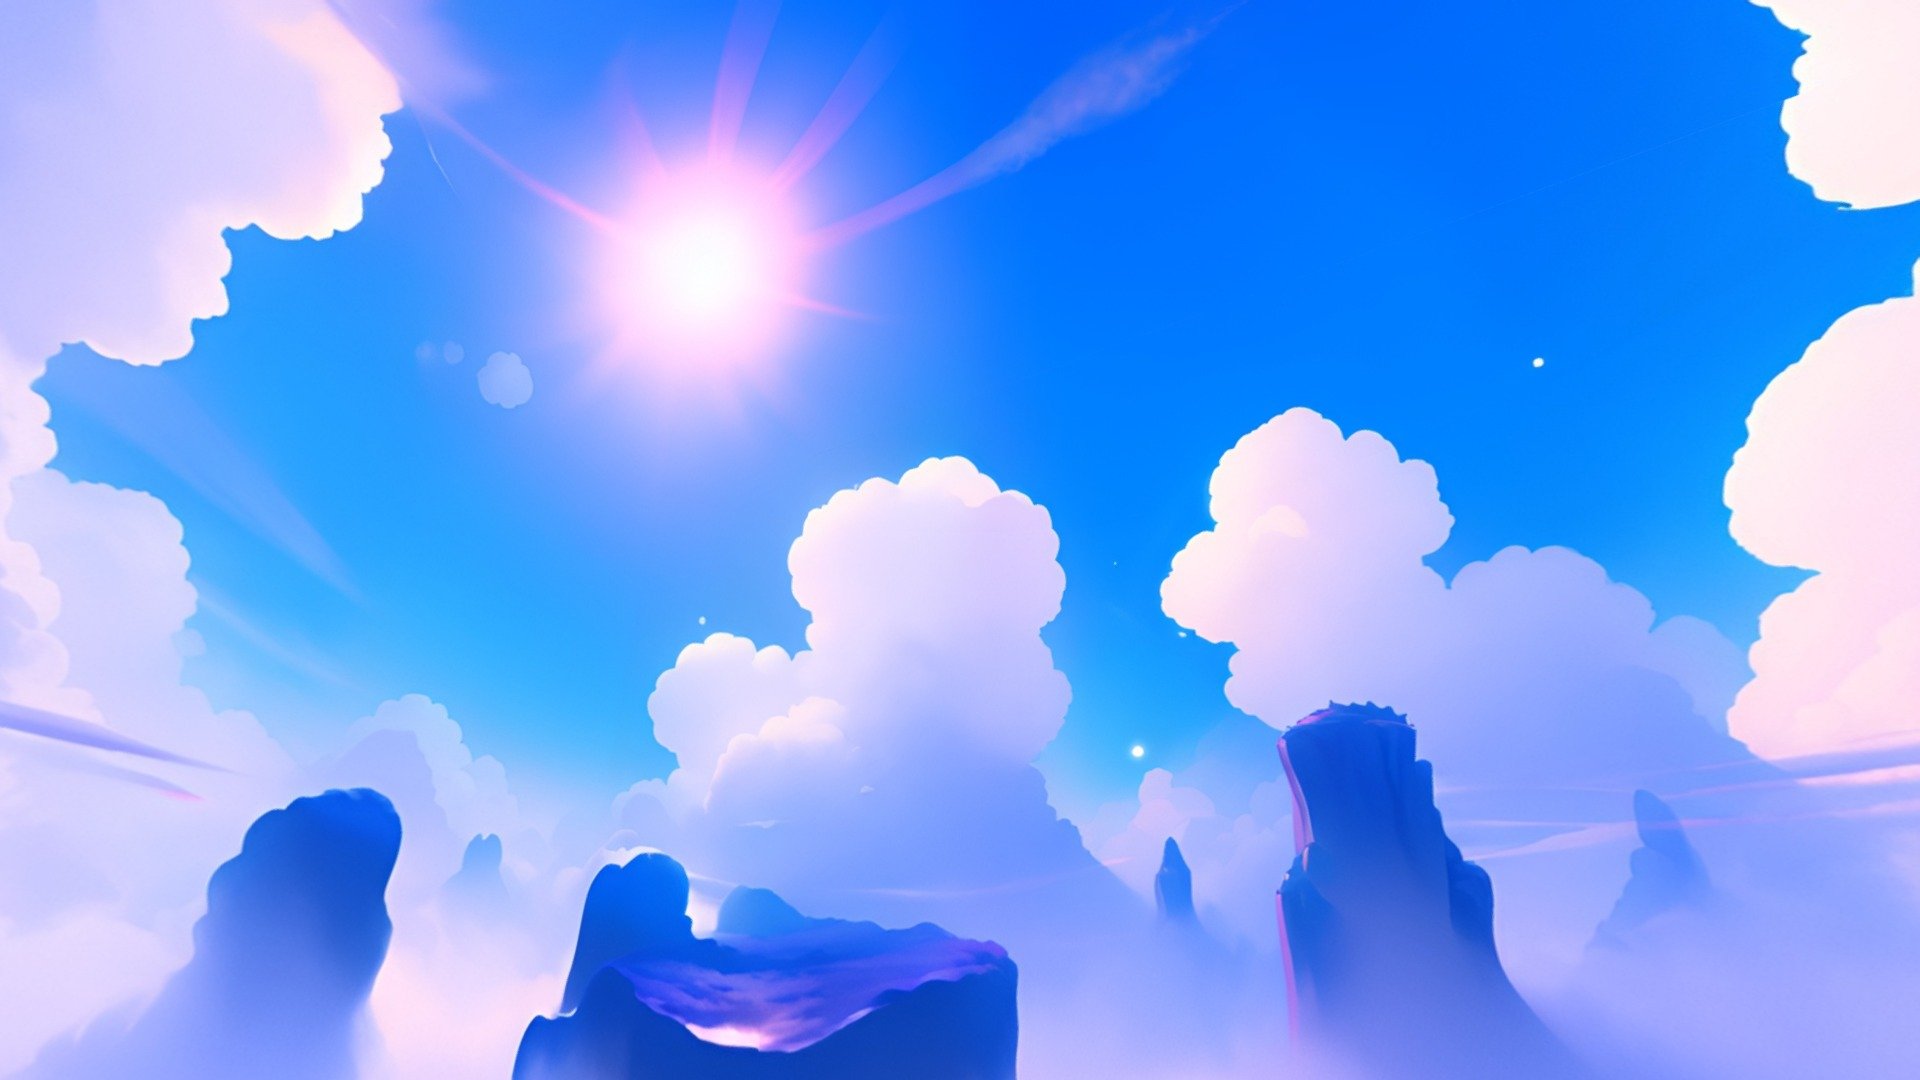 Beautiful stylized dreamy skybox. Perfect for beautiful, stylized environments and your rendering scene.

The package contains one panorama texture and one cubemap texture (png)




panorama texture: 6144 x 3072 

cubemap texture:  6144 x 4608

The sizes can be changed in your graphics program as desired



used: AI, Photoshop

*-------------Terms of Use--------------

Commercial use of the assets  provided is permitted but cannot be included in an asset pack or sold at any sort of asset/resource marketplace or be shared for free* - 6k Stylized Cloudy Skybox 002 - Buy Royalty Free 3D model by Stylized Box (@Stylized_Box) 3d model